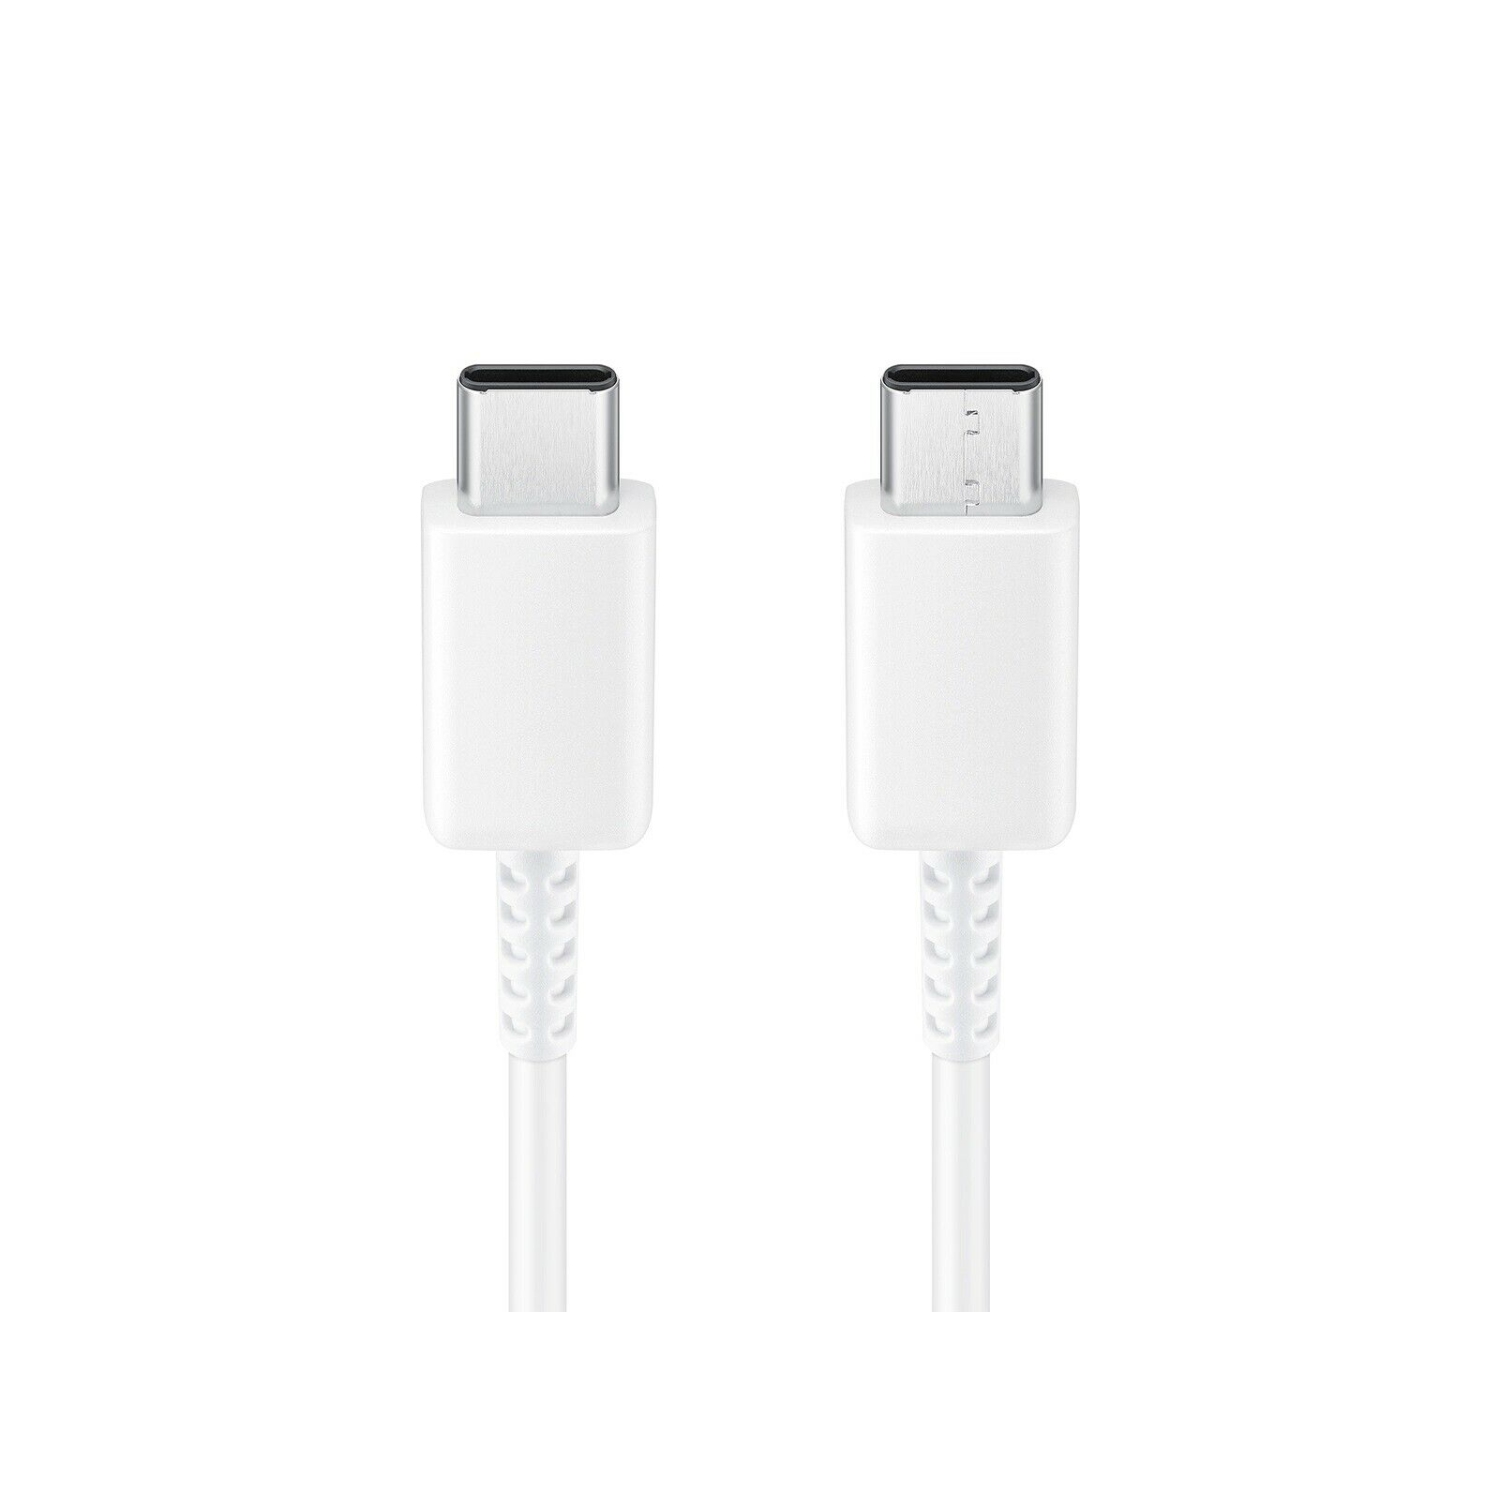 3.3Ft USB-C to Type-C Fast Charging Cable Cord for Samsung Galaxy S10 S20 Note 9 10, Google Pixel, LG G7 G8, Moto G6 G7, White